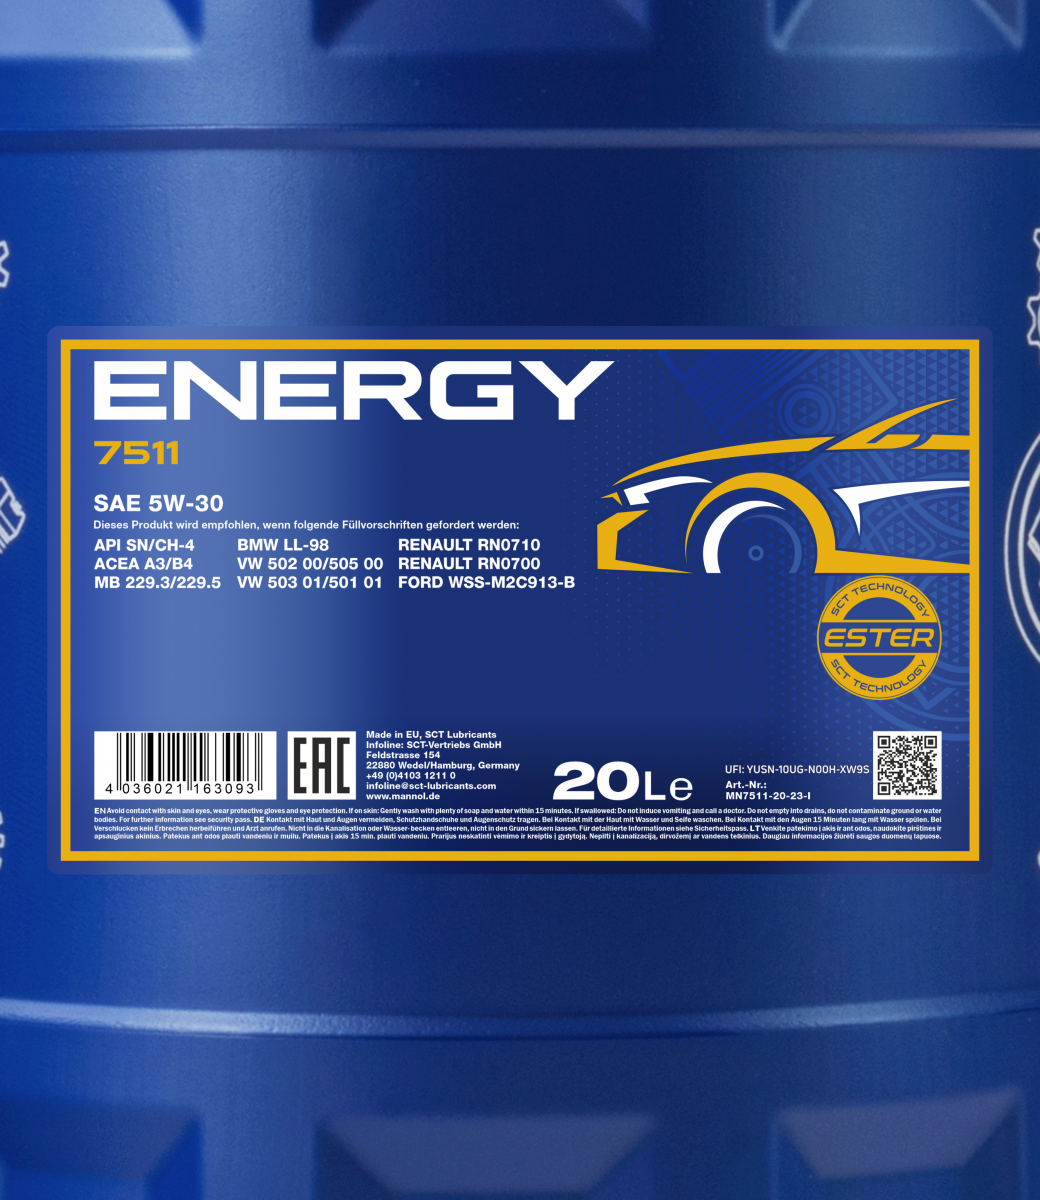 Mannol USA Inc. - ⚡#MercedesBenz #Approval 229.51⚡ ✓ MANNOL Energy Premium  5W-30 API SN/CF - Fully synthetic engine oil that is designed to be used in  petrol and diesel engine vehicles, which